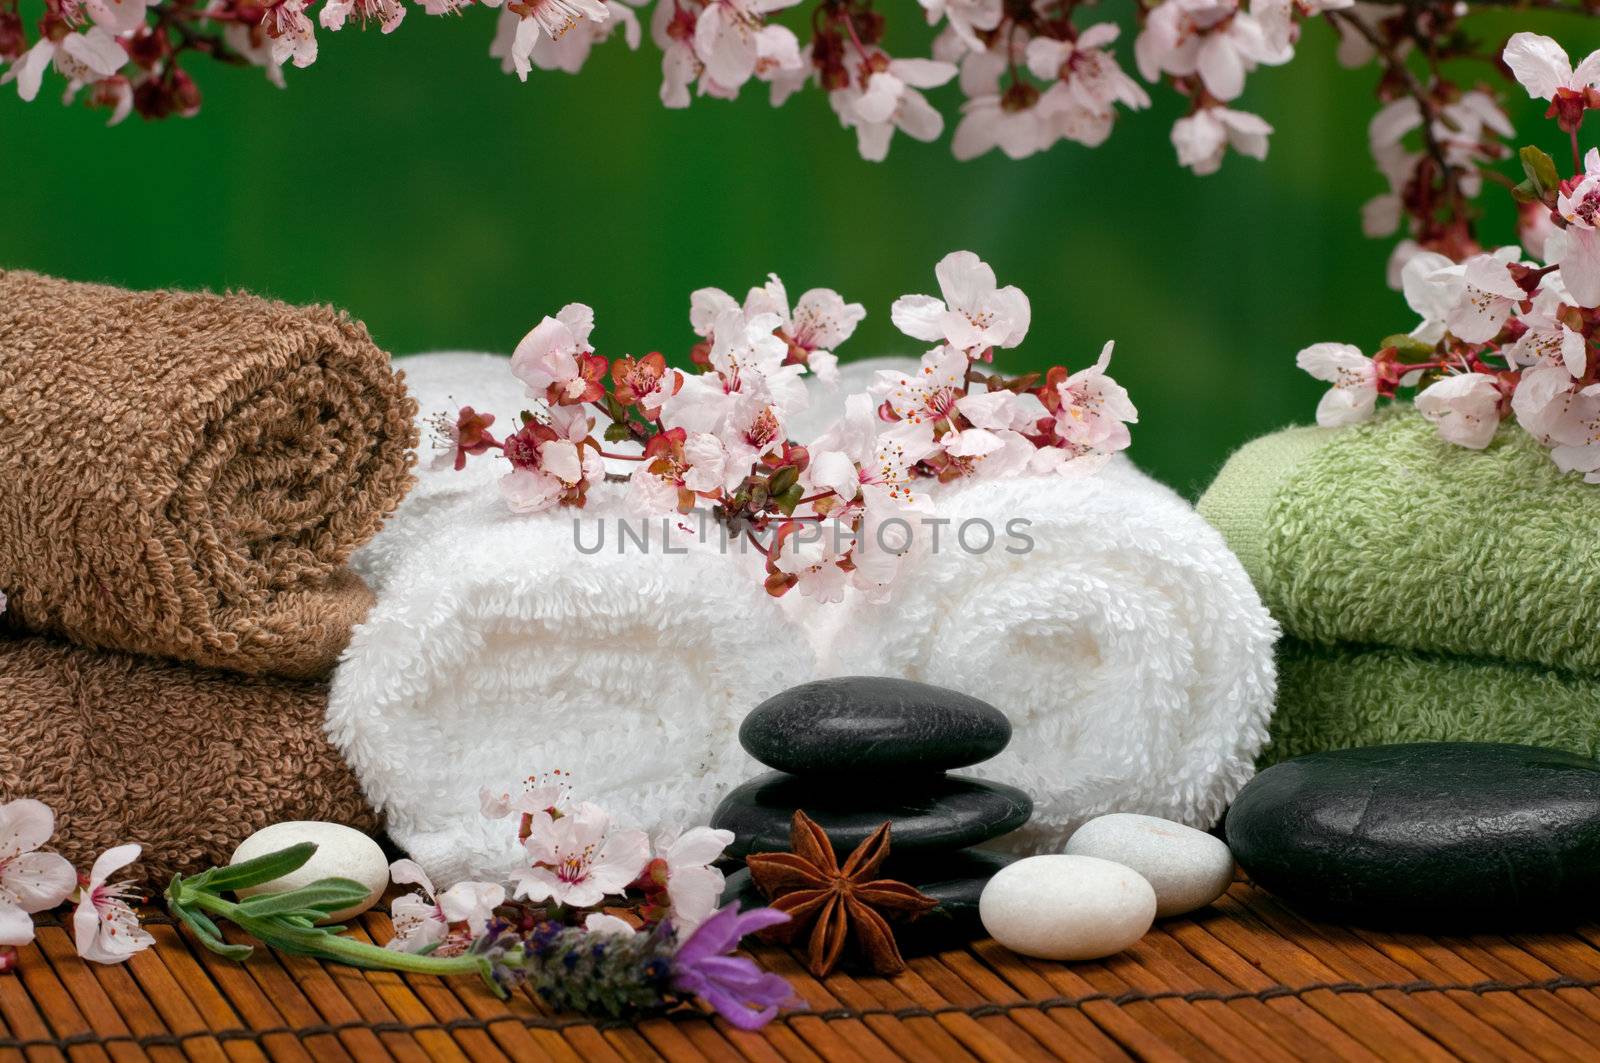 Spa scene with pebbles, lavender, towels and cherry blossoms